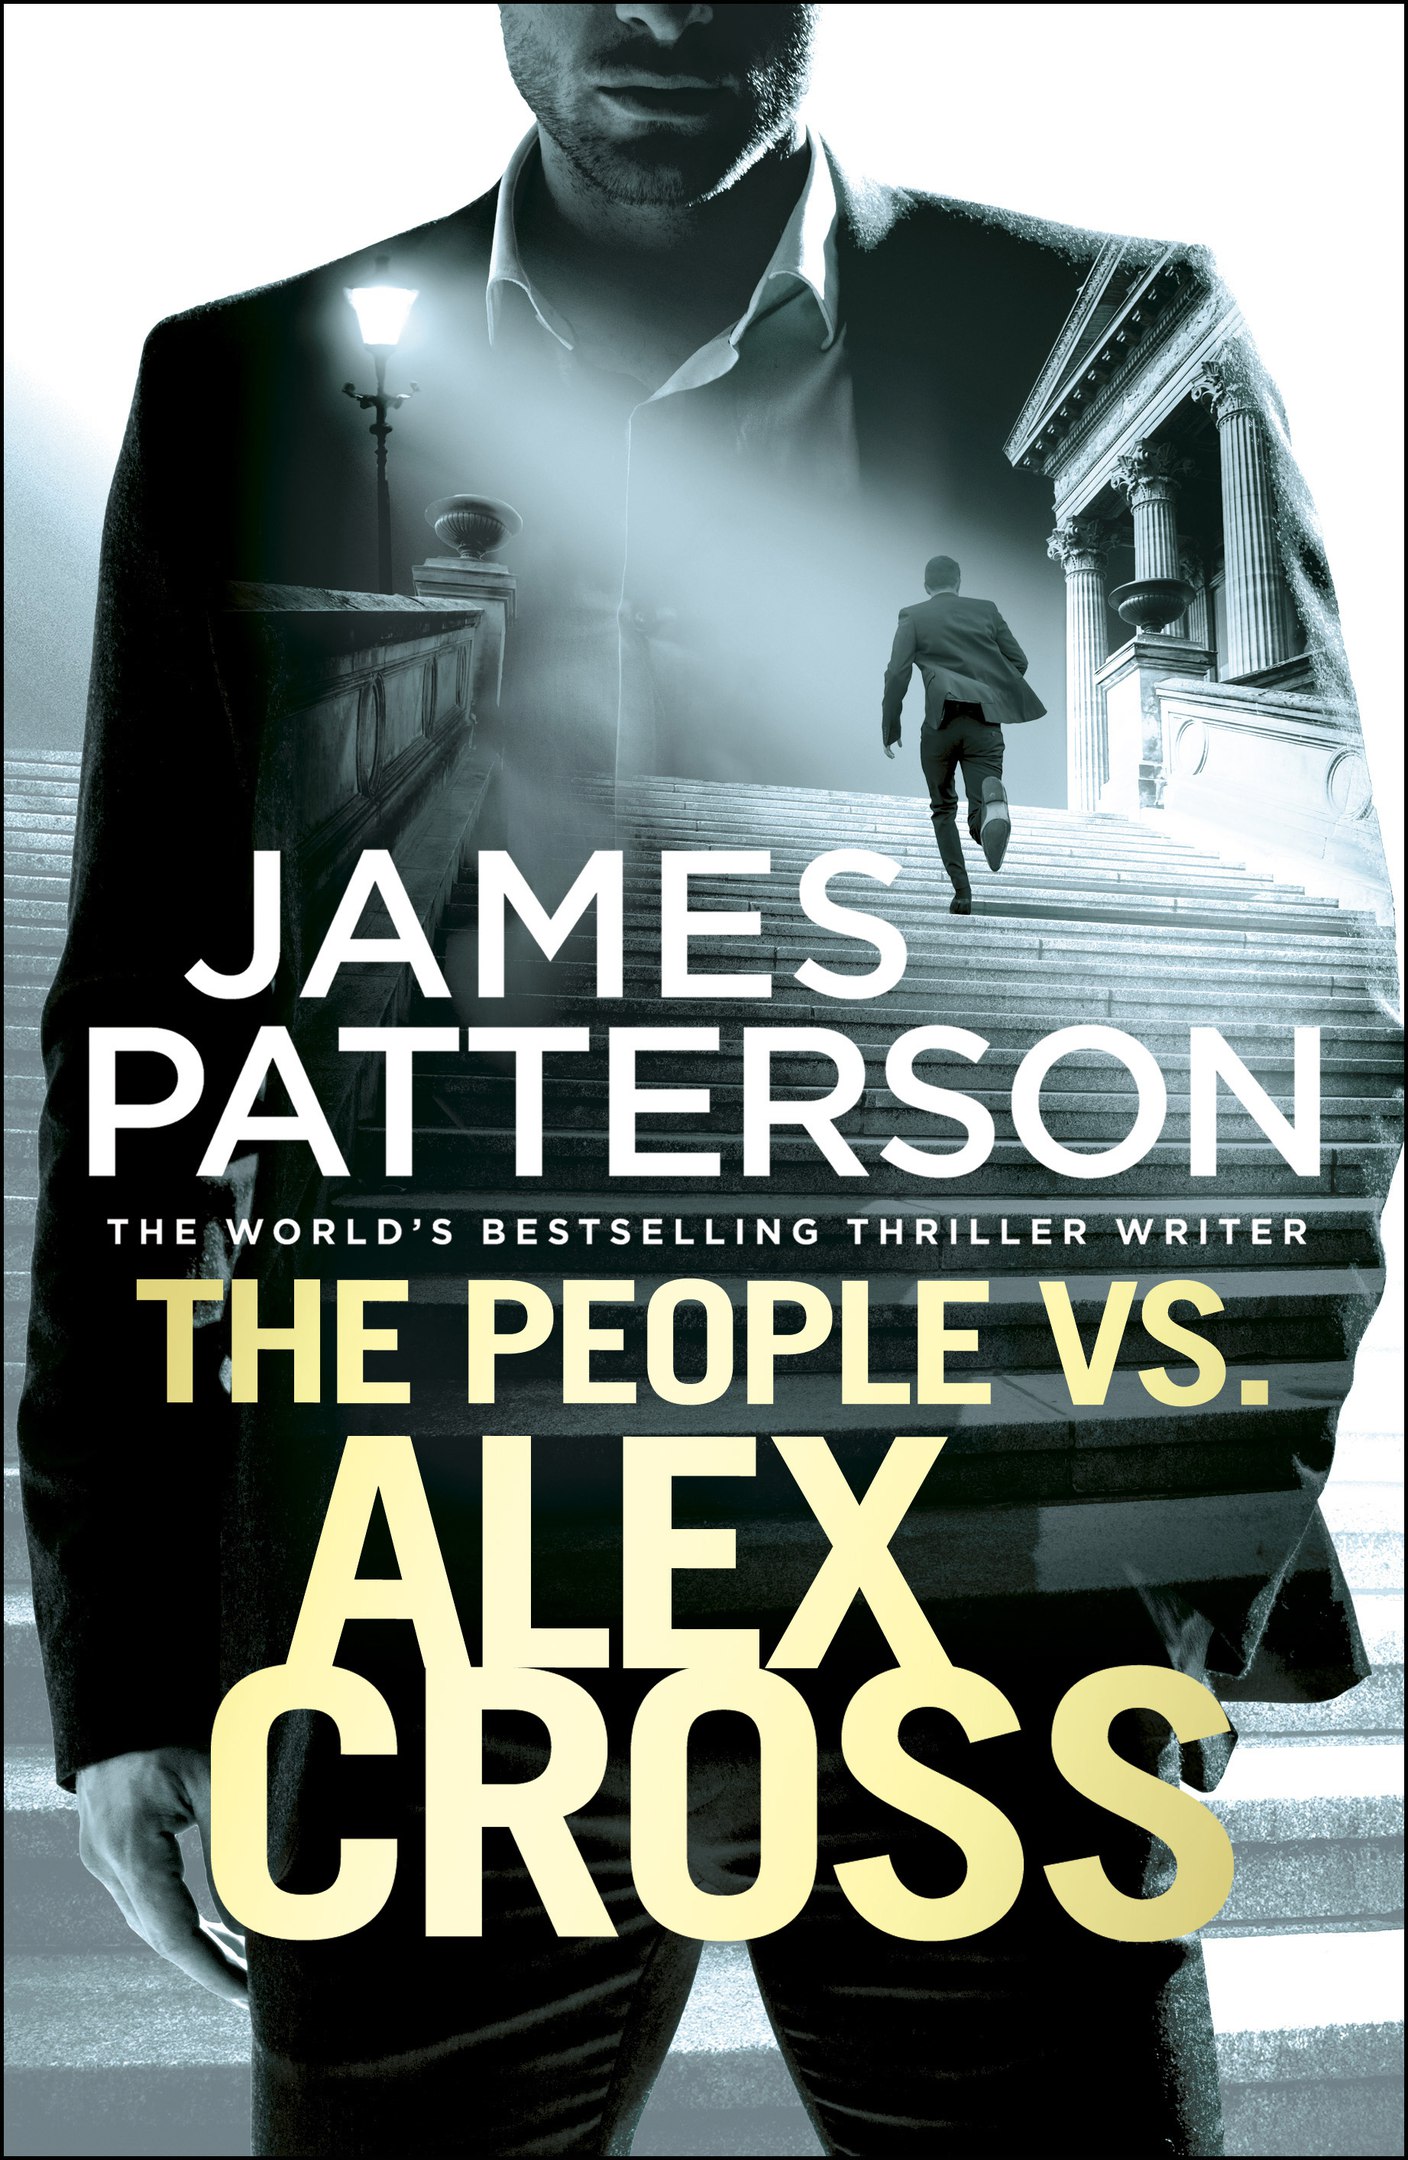 James Patterson – The People Vs